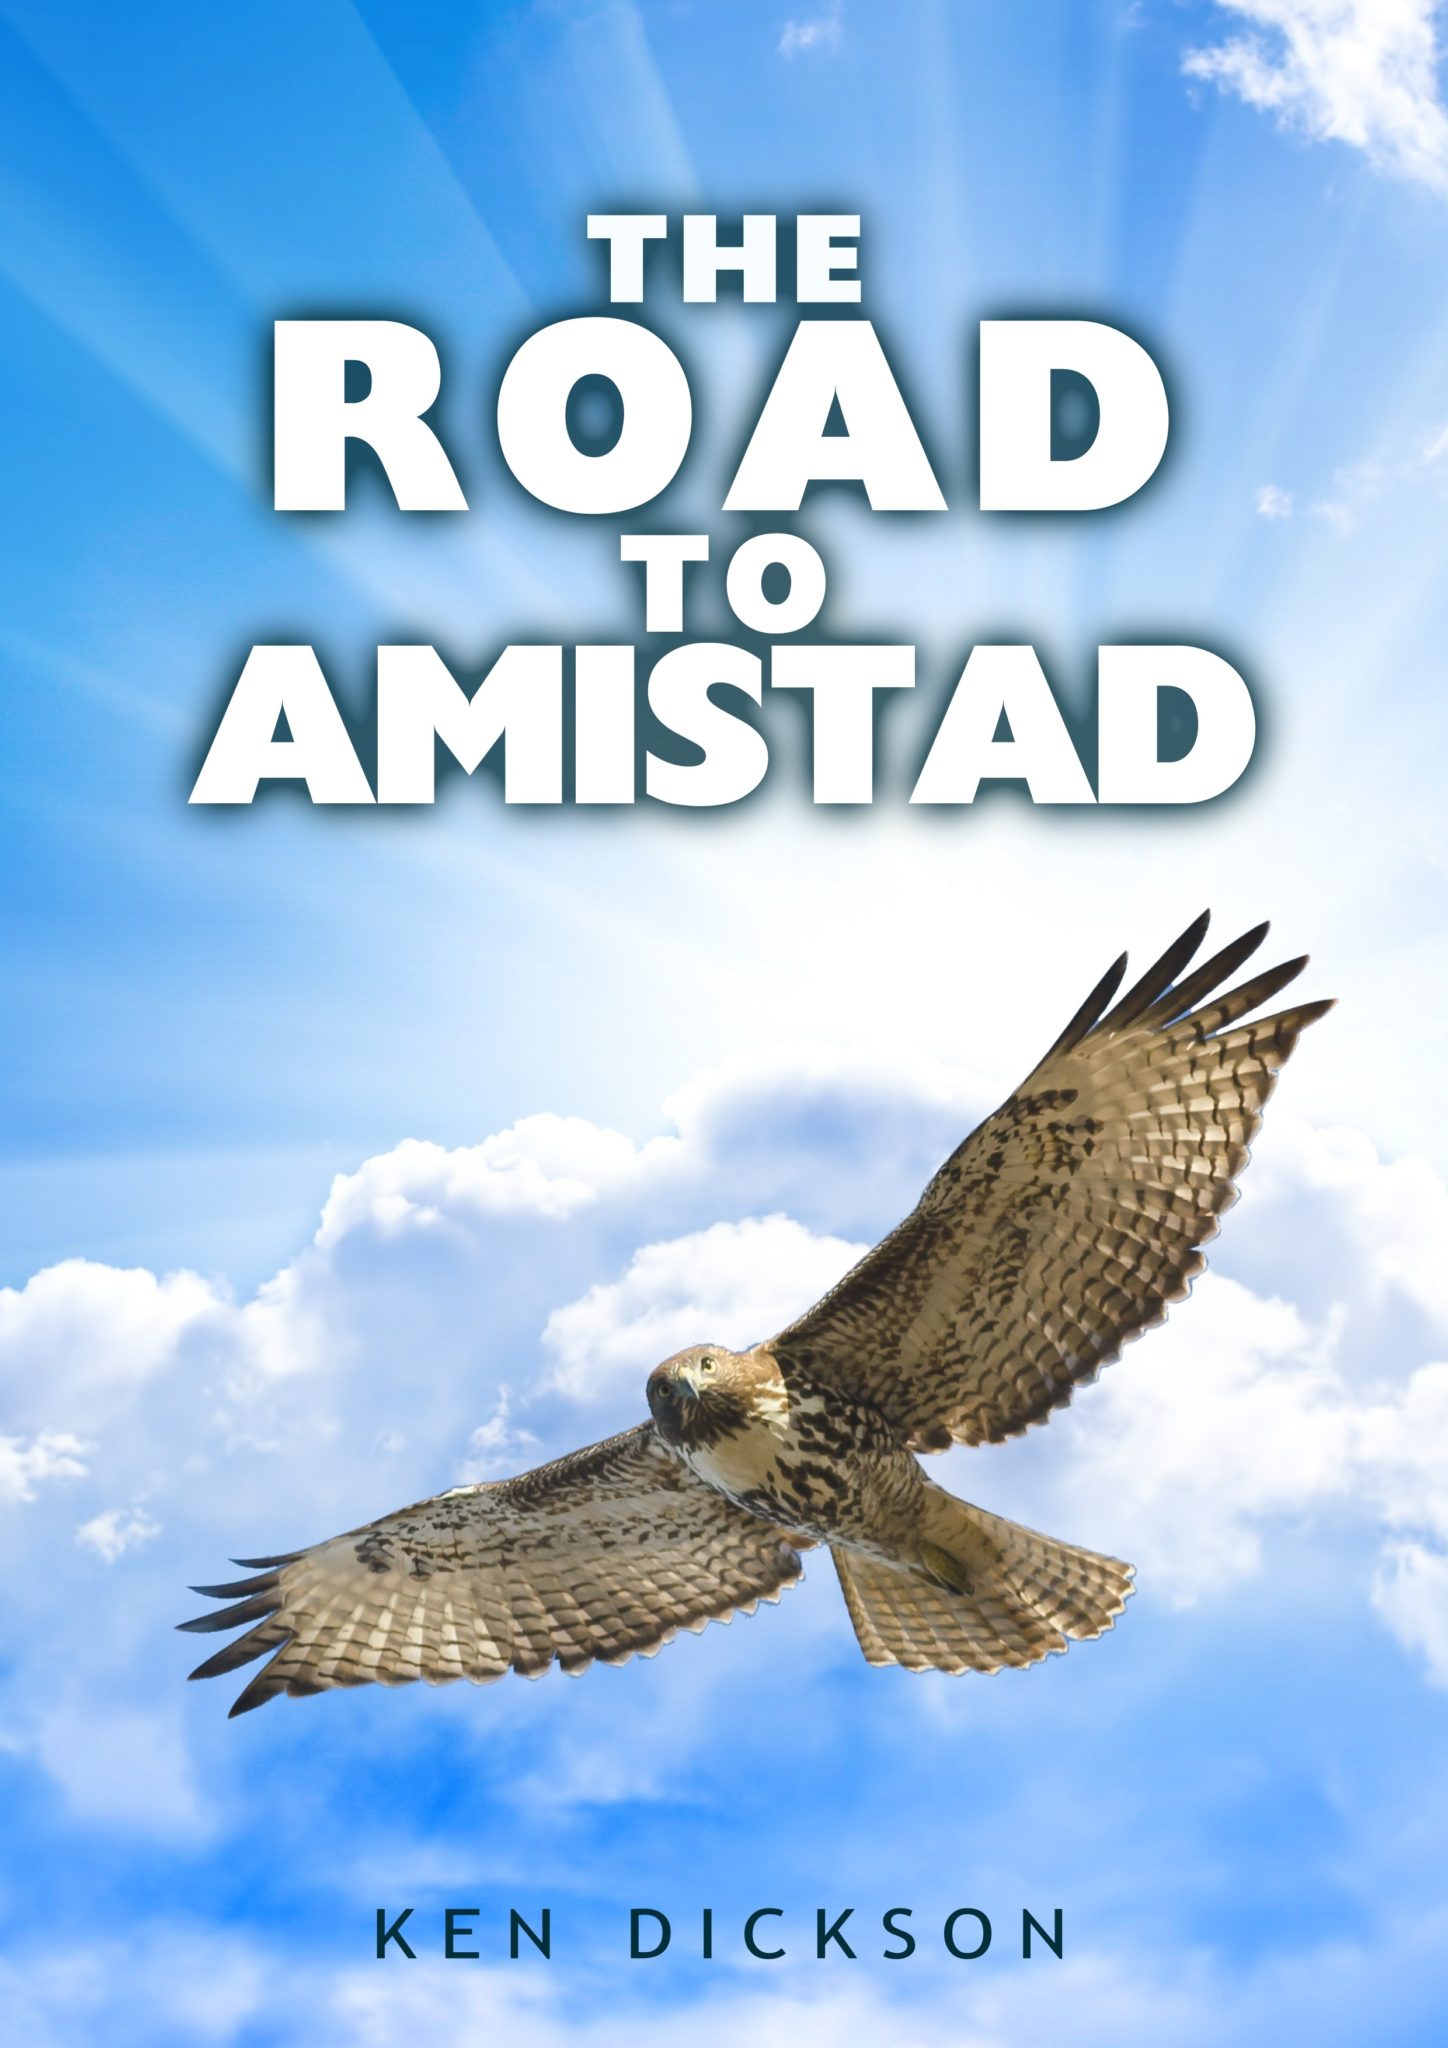 FREE: The Road to Amistad by Ken Dickson